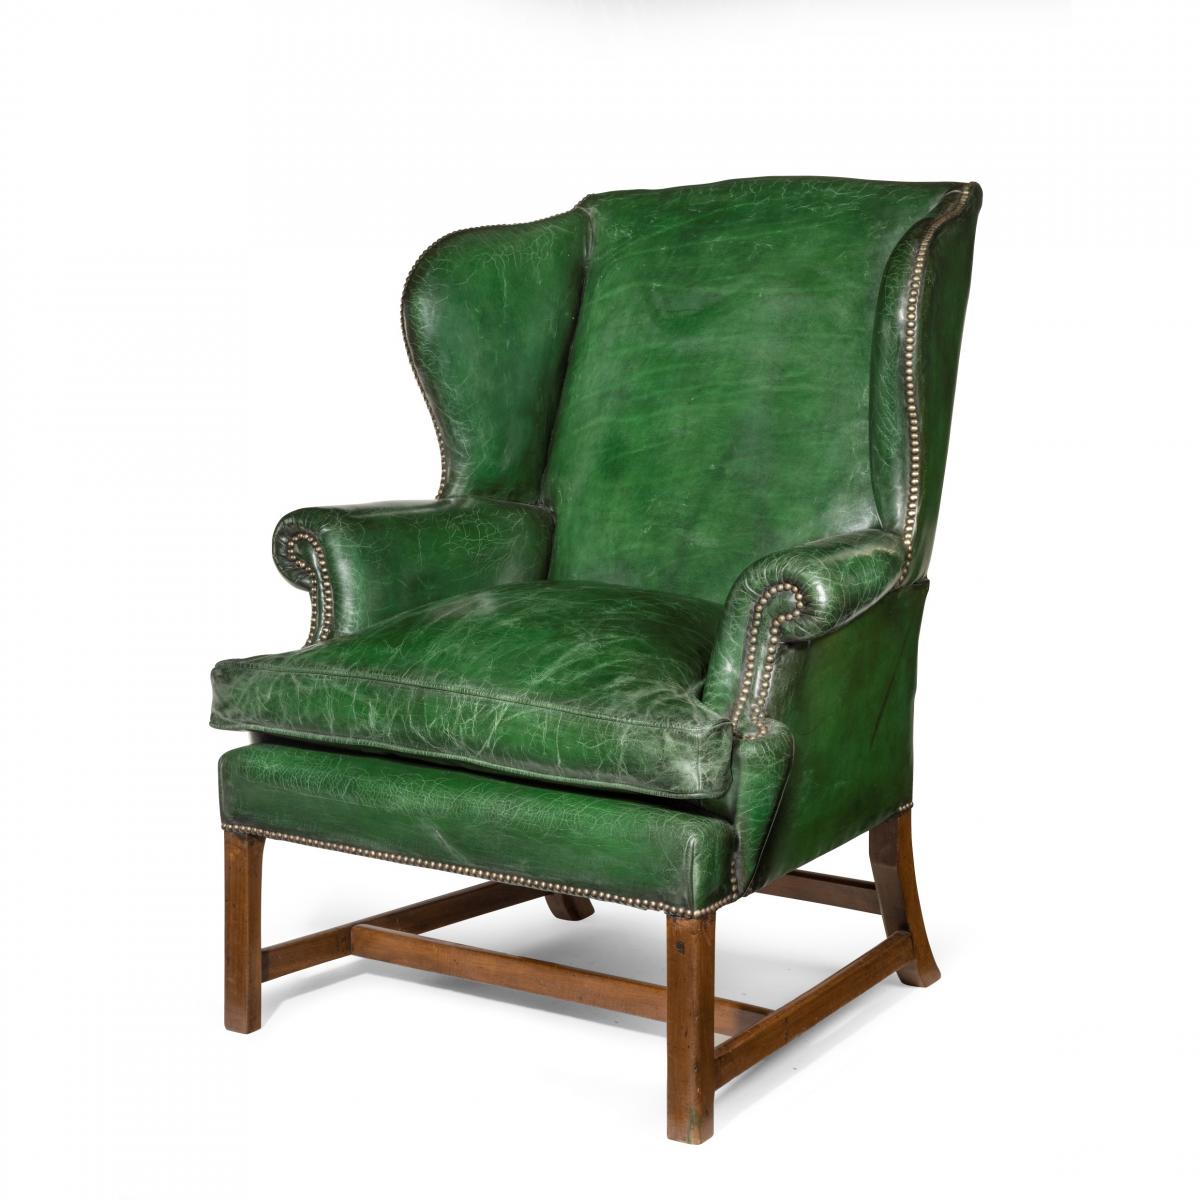 A Generous George III mahogany Wing Arm Chair